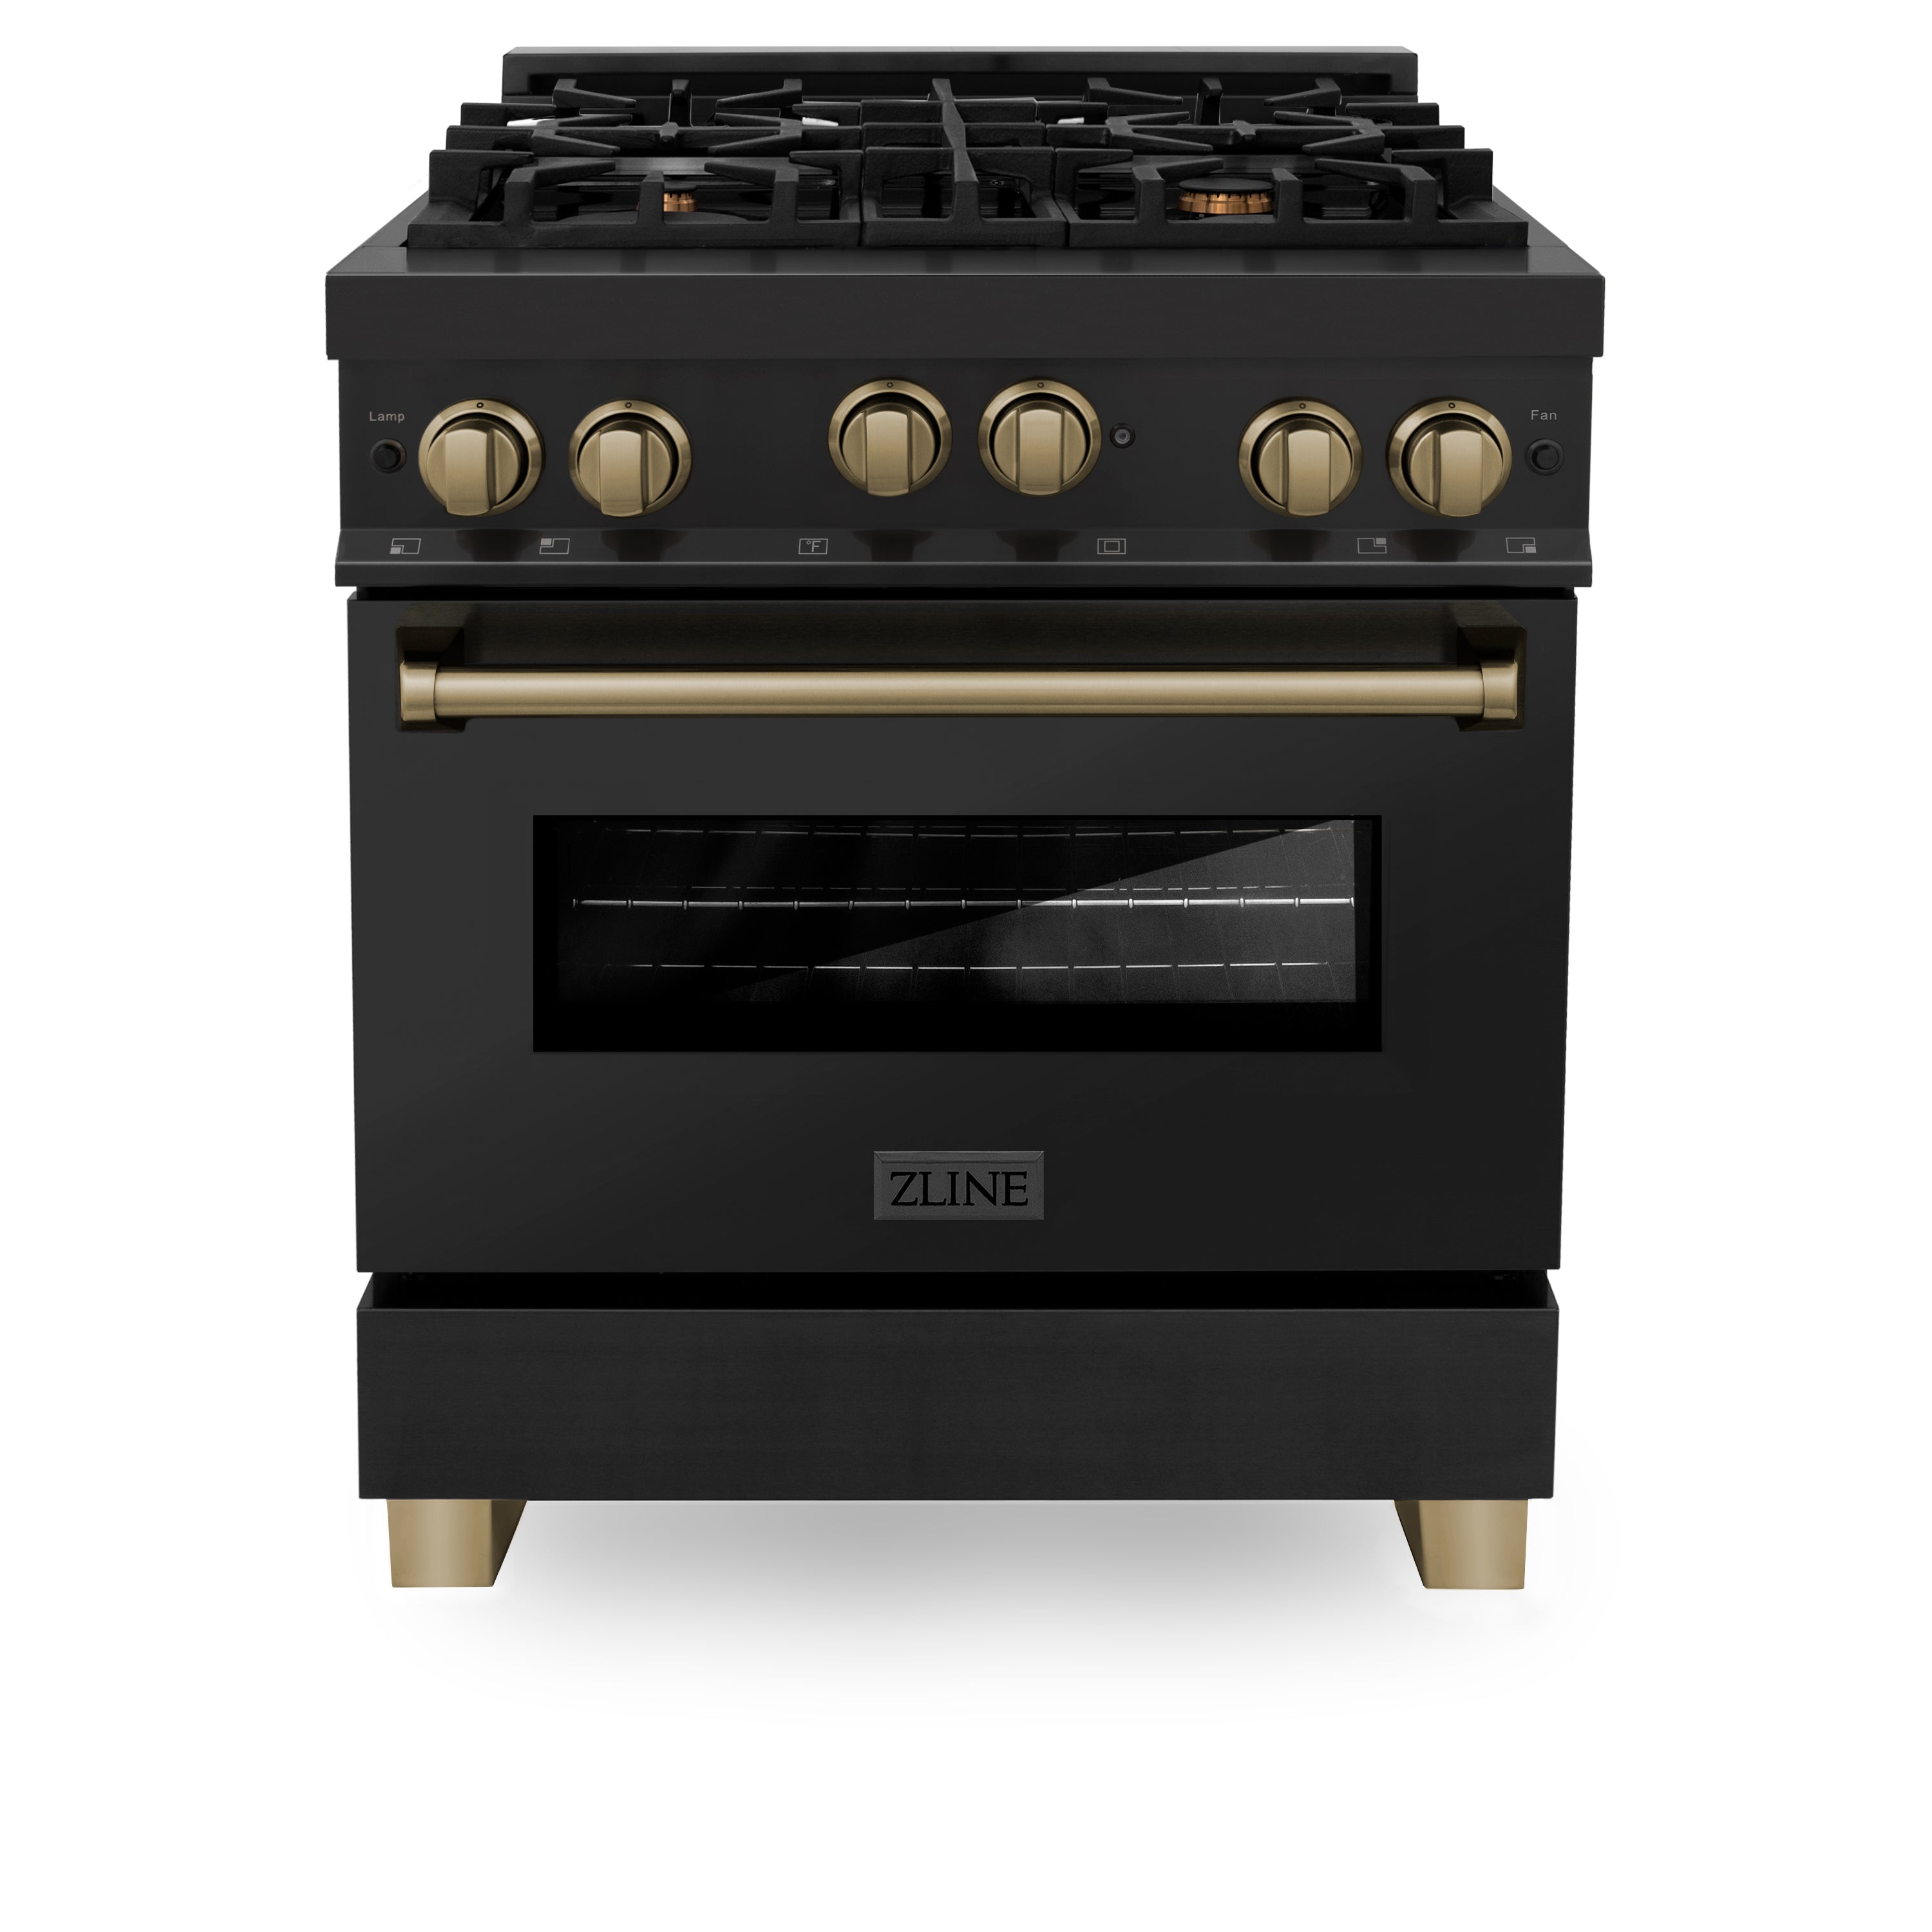 ZLINE Autograph Edition 30 in. 4.0 cu. ft. Range with Gas Stove and Gas Oven in Black Stainless Steel with Accents (RGBZ-30)